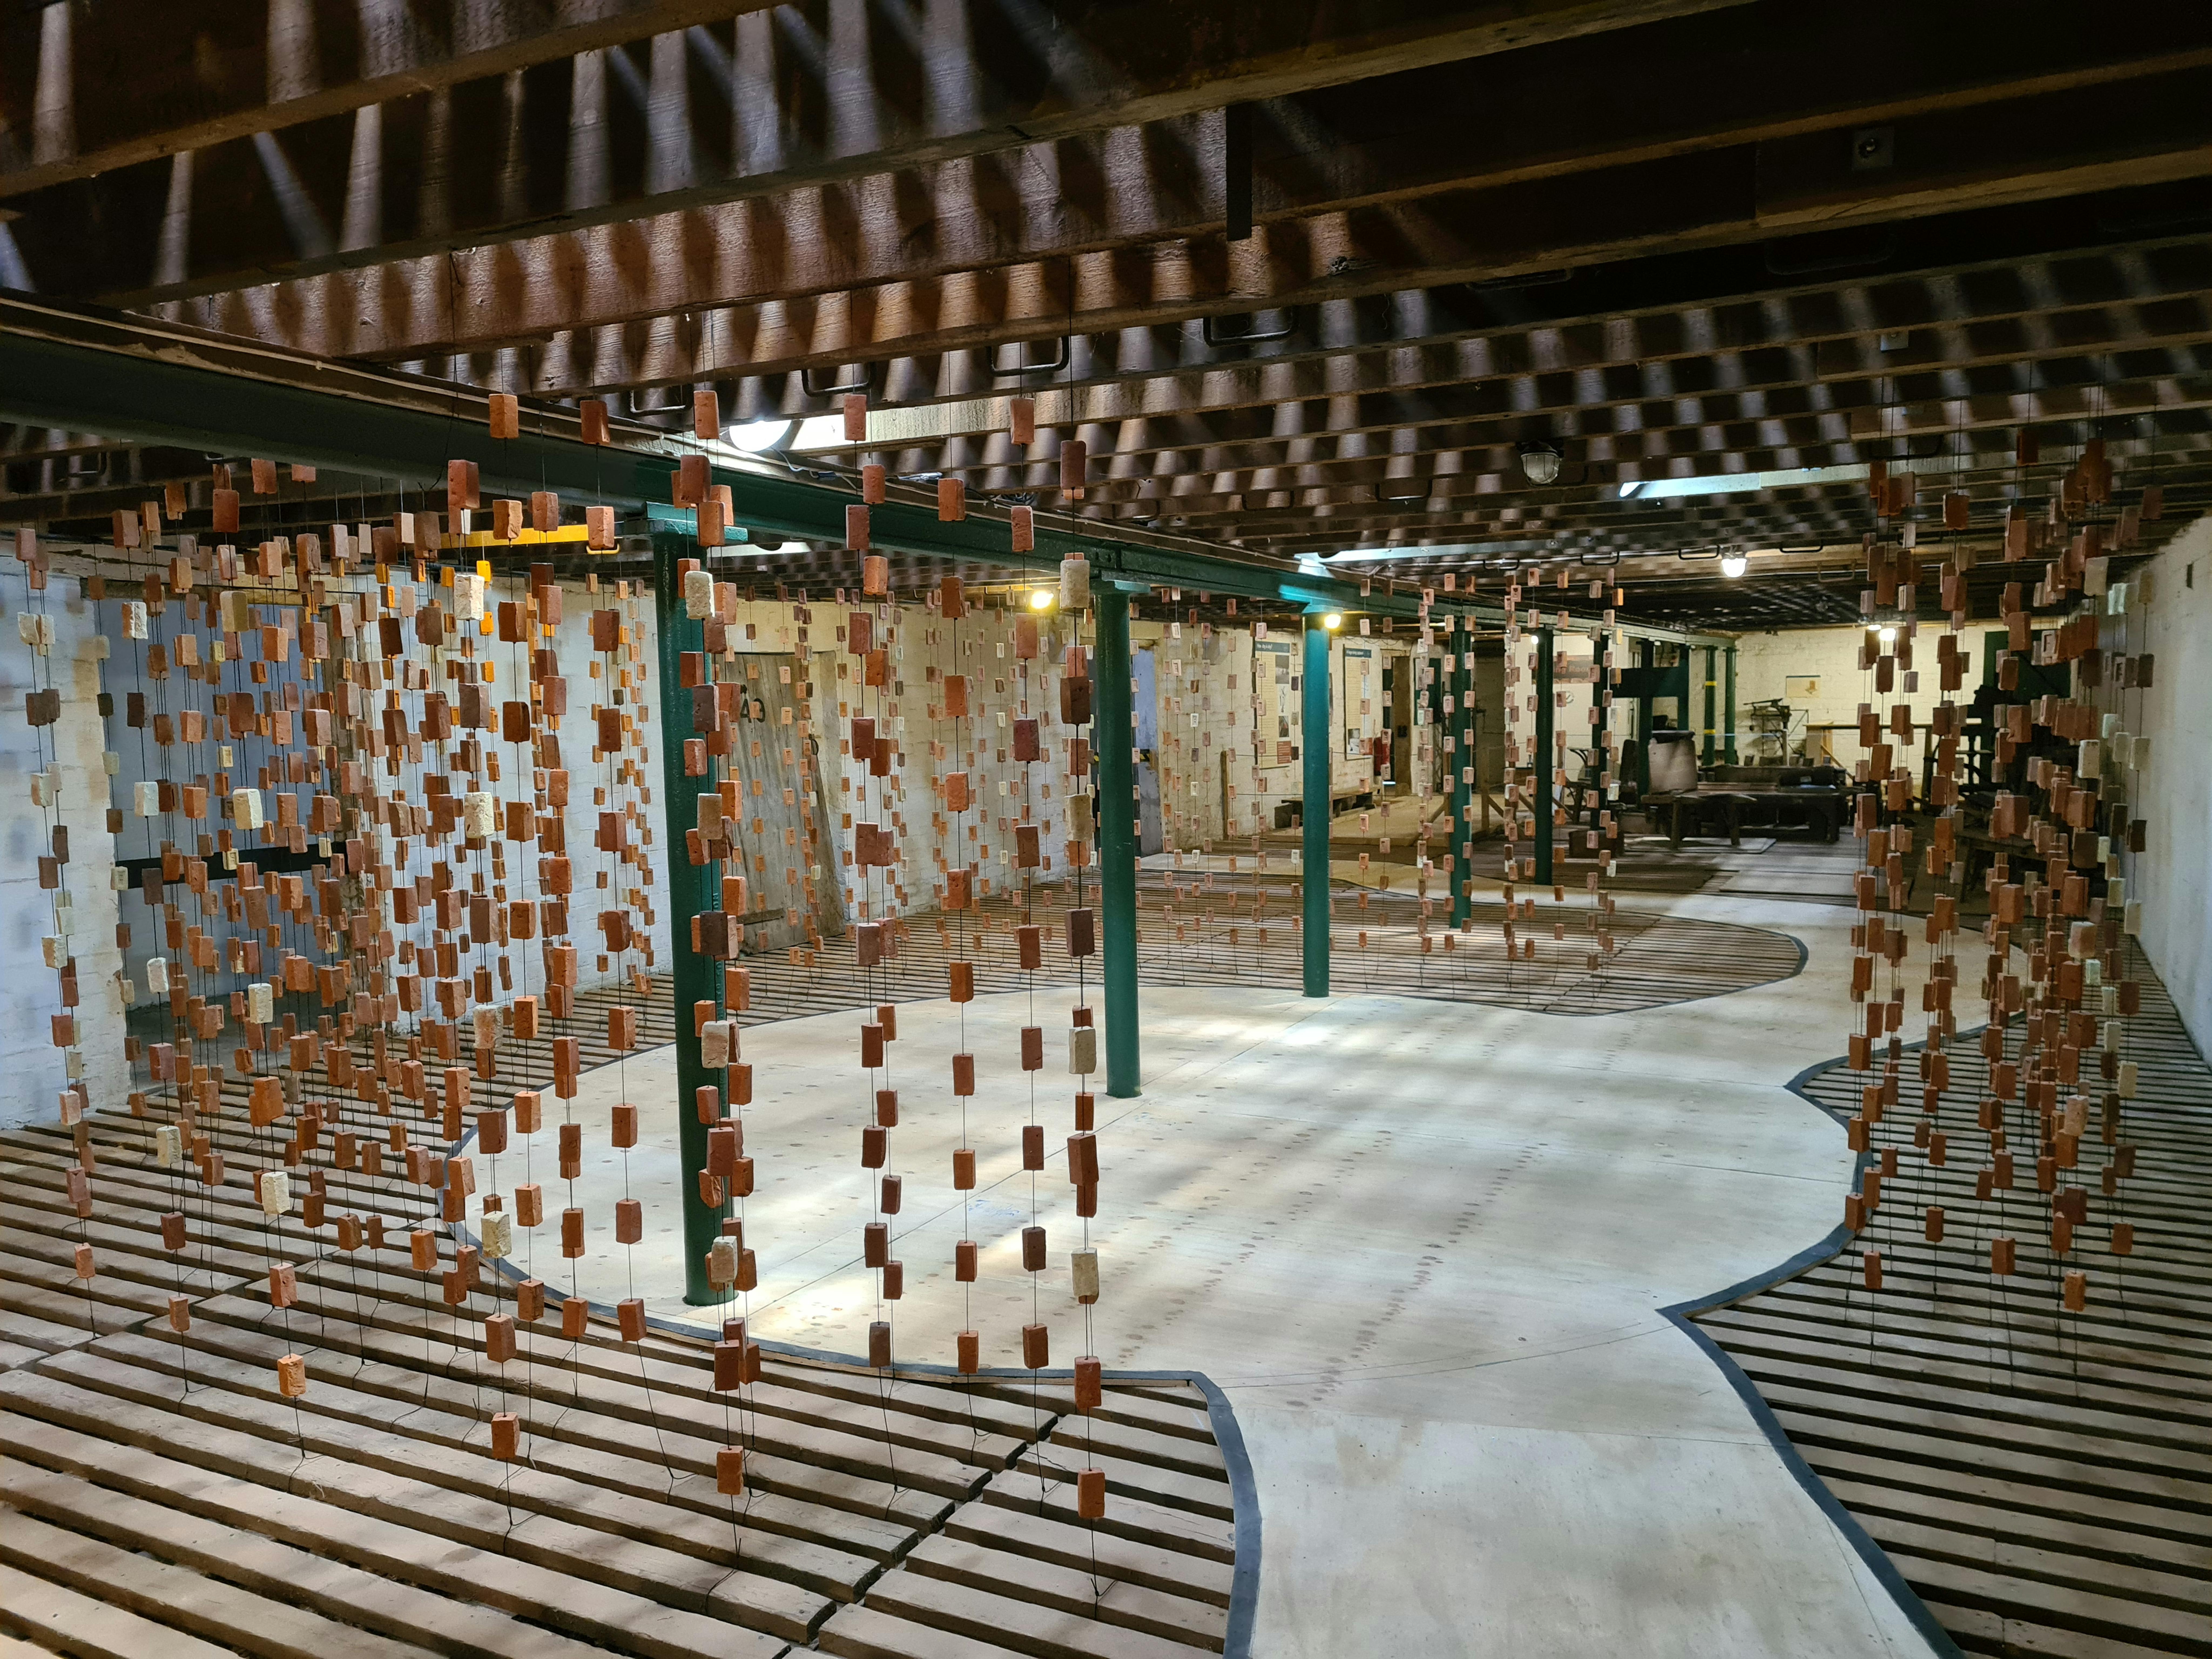 Hundreds of bricks hang from pieces of string from the ceiling. Light cascades through the room casting shadows of the bricks on the floor and walls. 